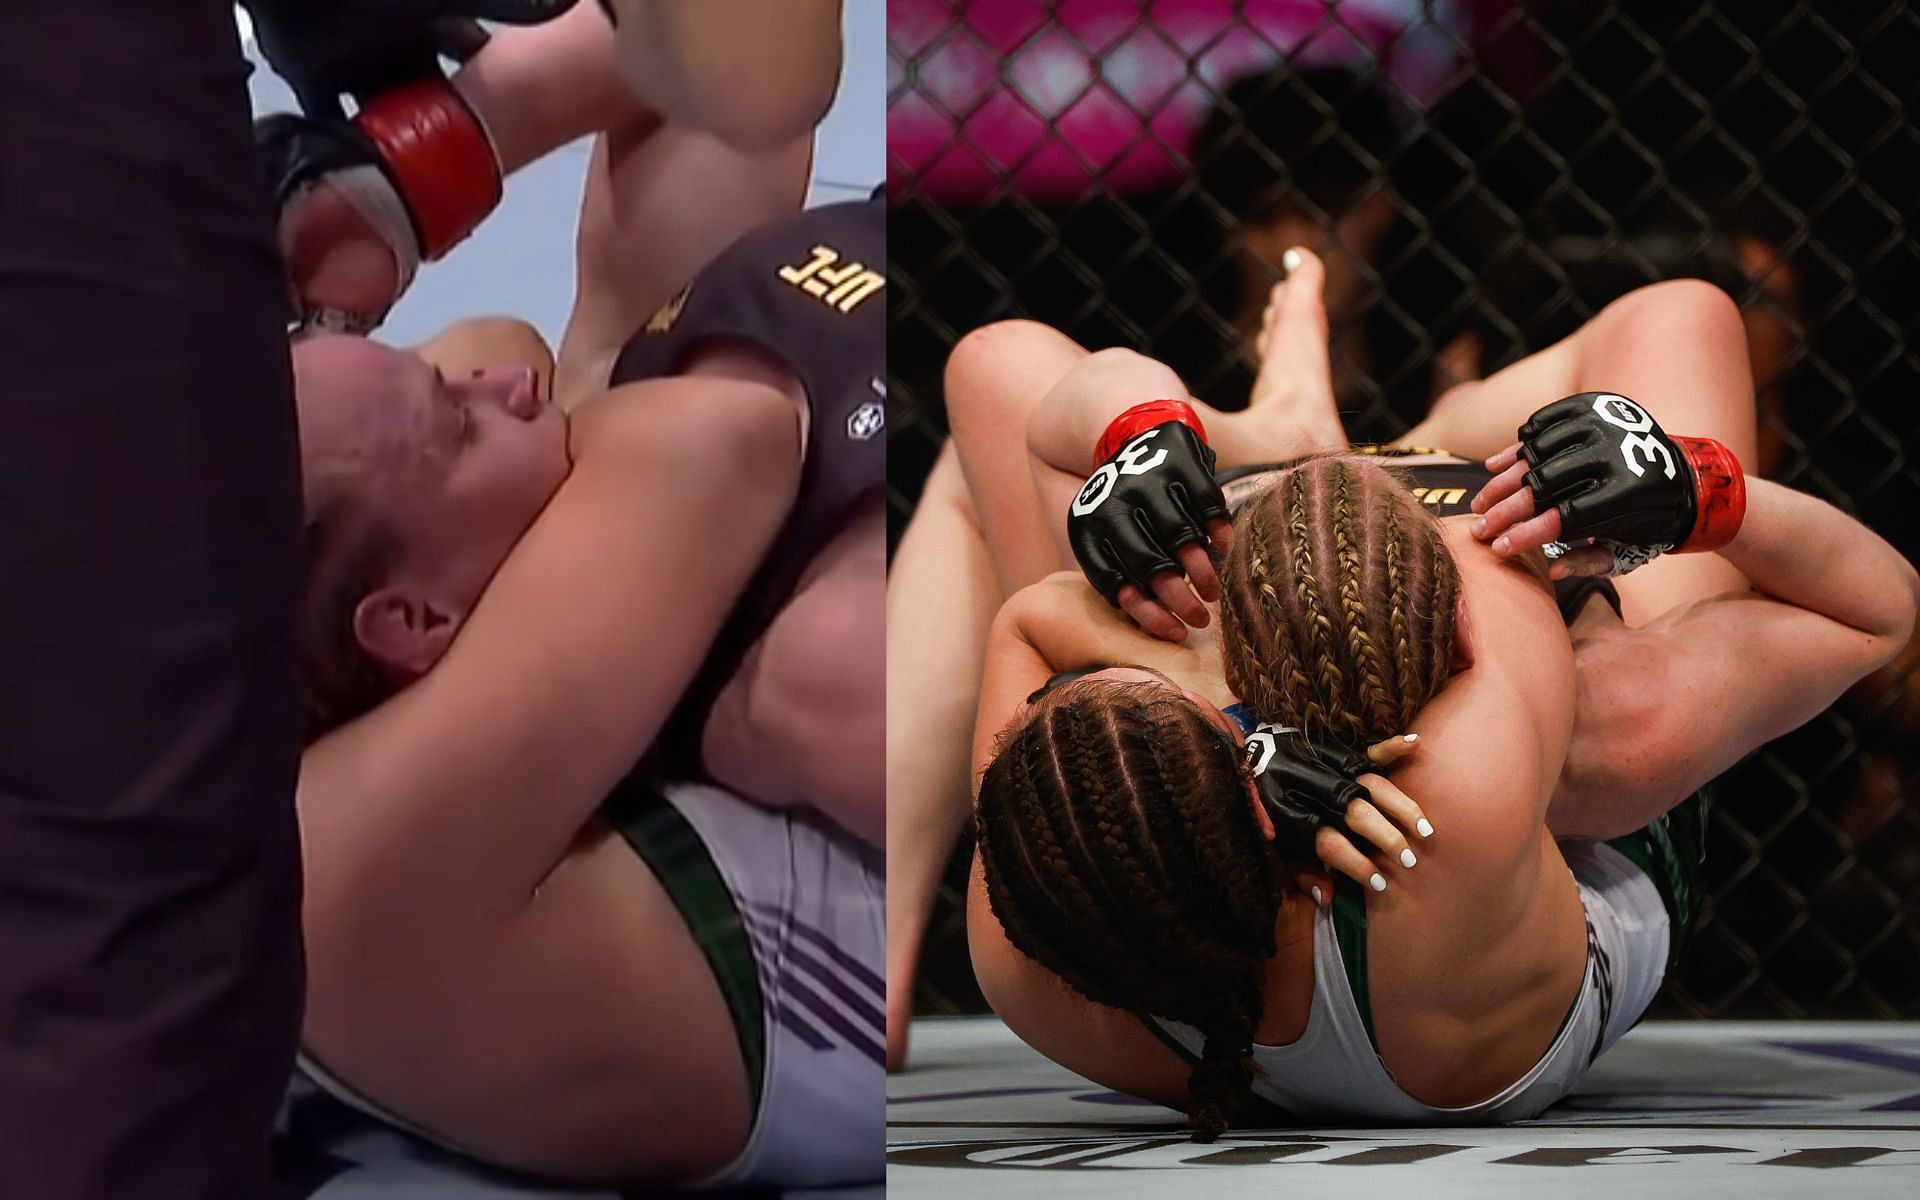 Valentina Shevchenko vs Alexa Grasso. [Images courtesy: left image from Twitter @Grabaka_Hitman and right image from Getty Images]